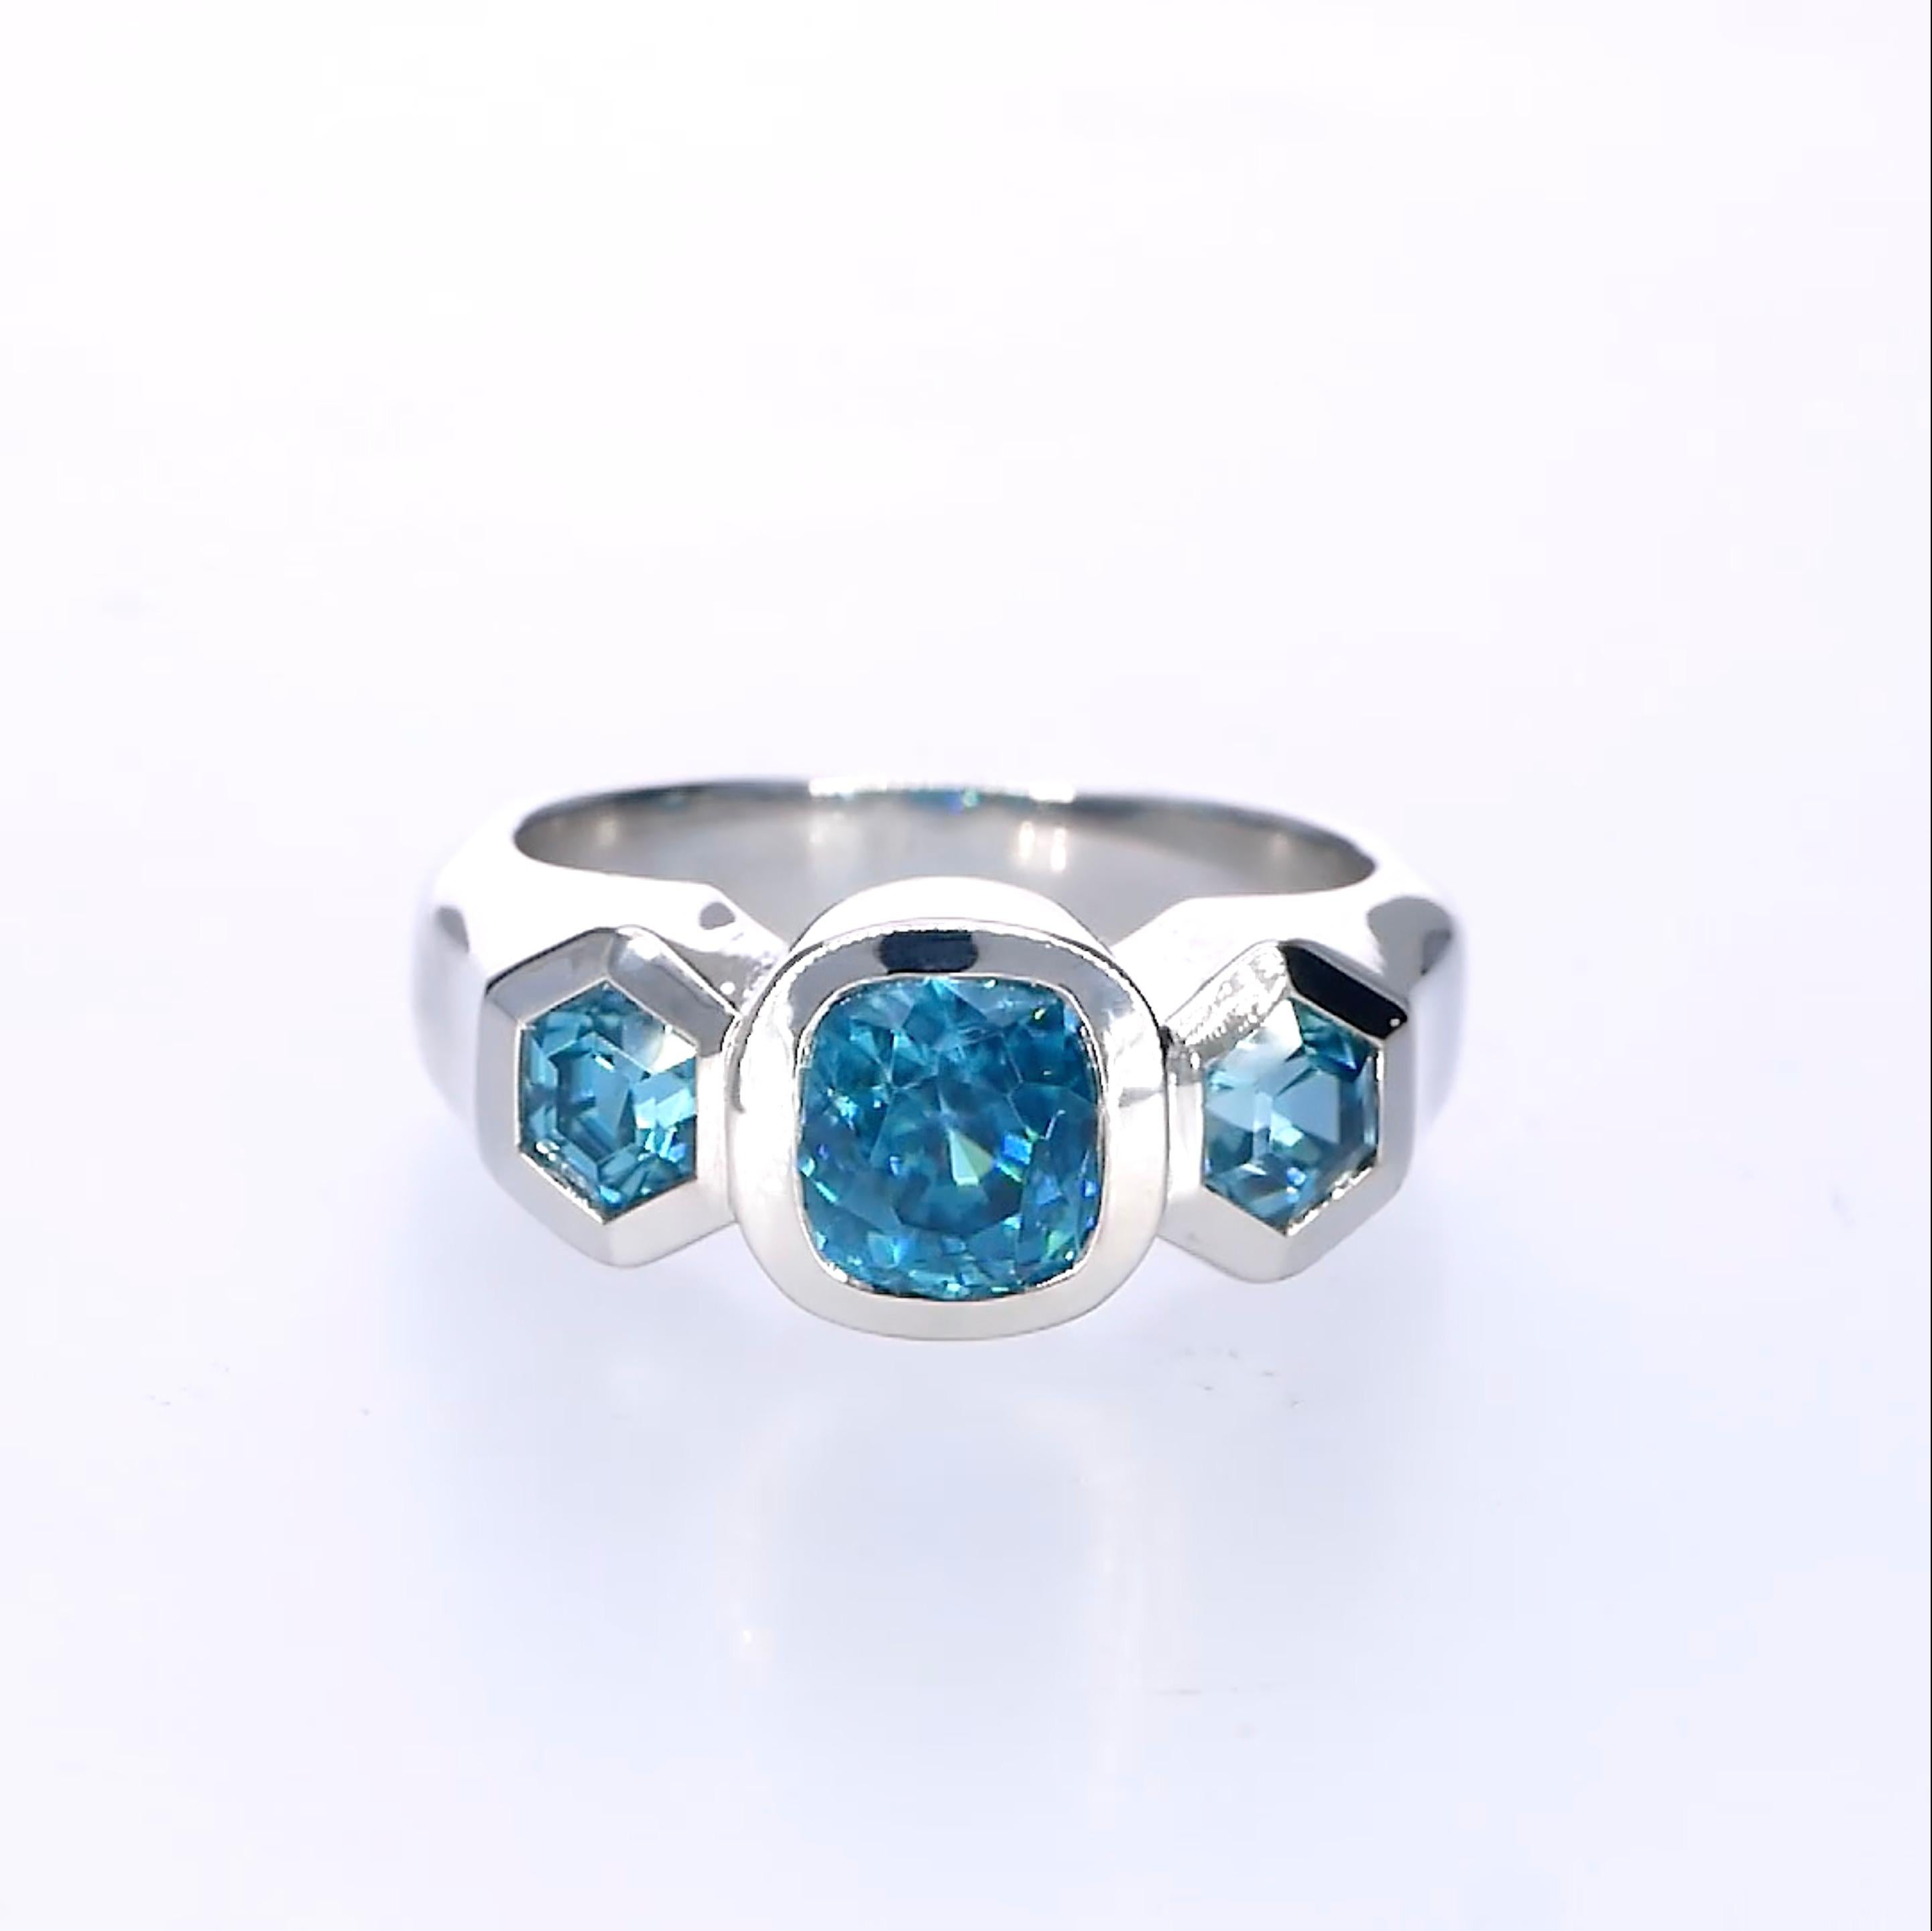 Mixed Cut Orloff of Denmark, 4.1 ct Natural Zircon Three-Stone Ring in 925 Sterling Silver